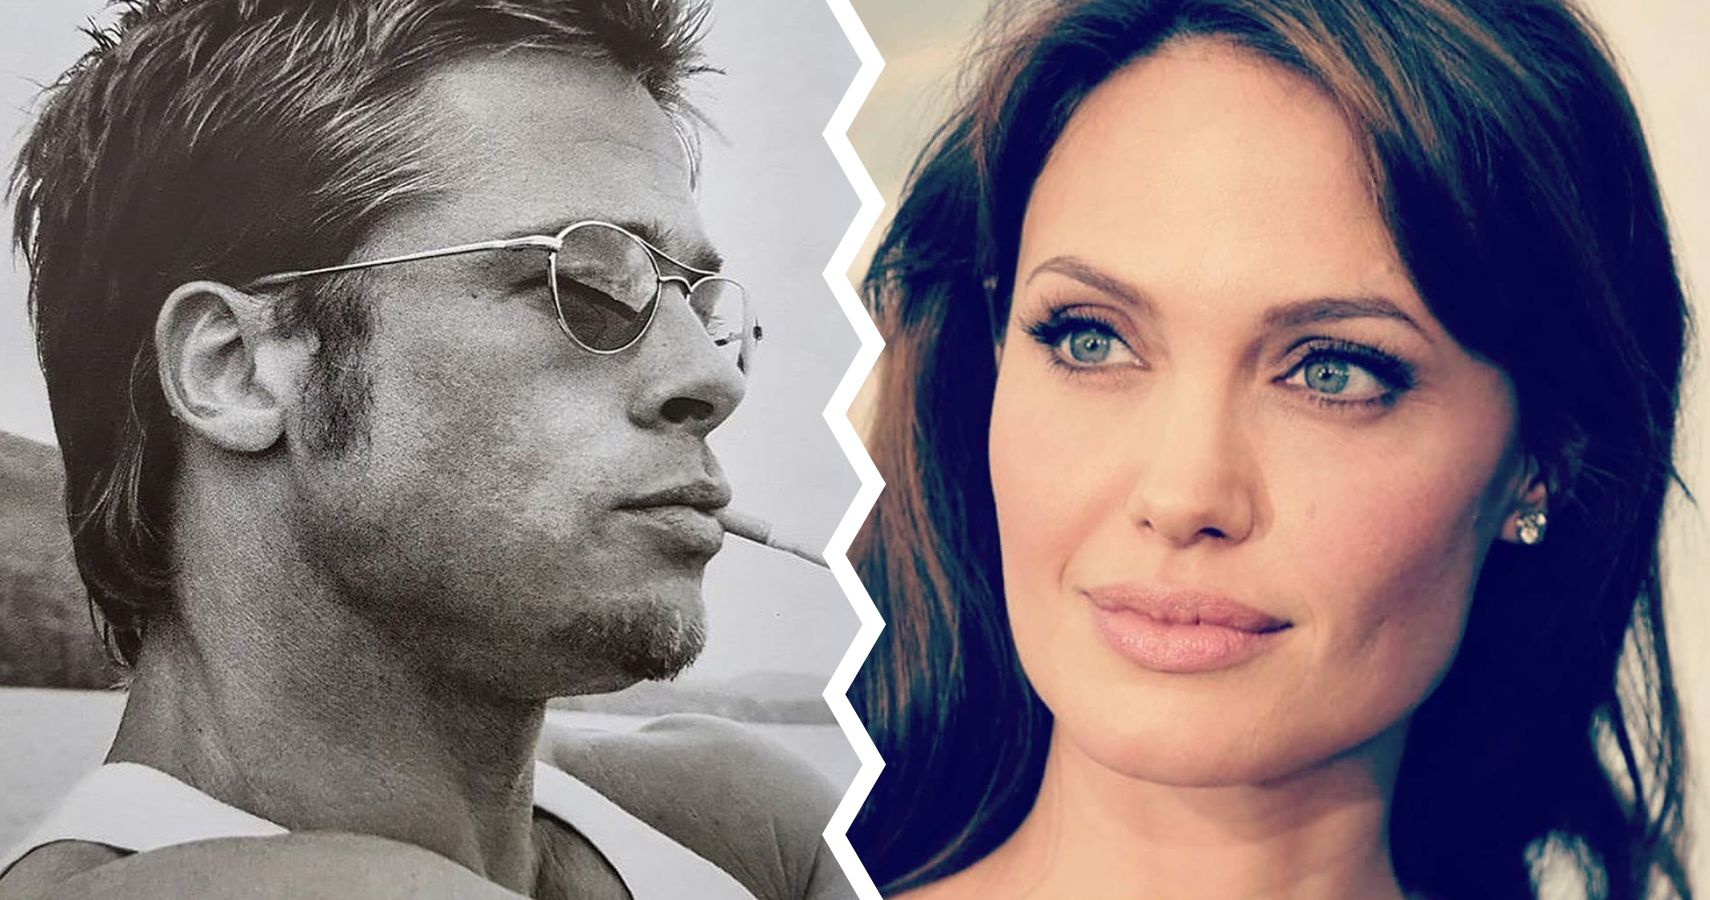 What’s Going On With Angelina Jolie & Brad Pitt’s Custody Battle Right Now?